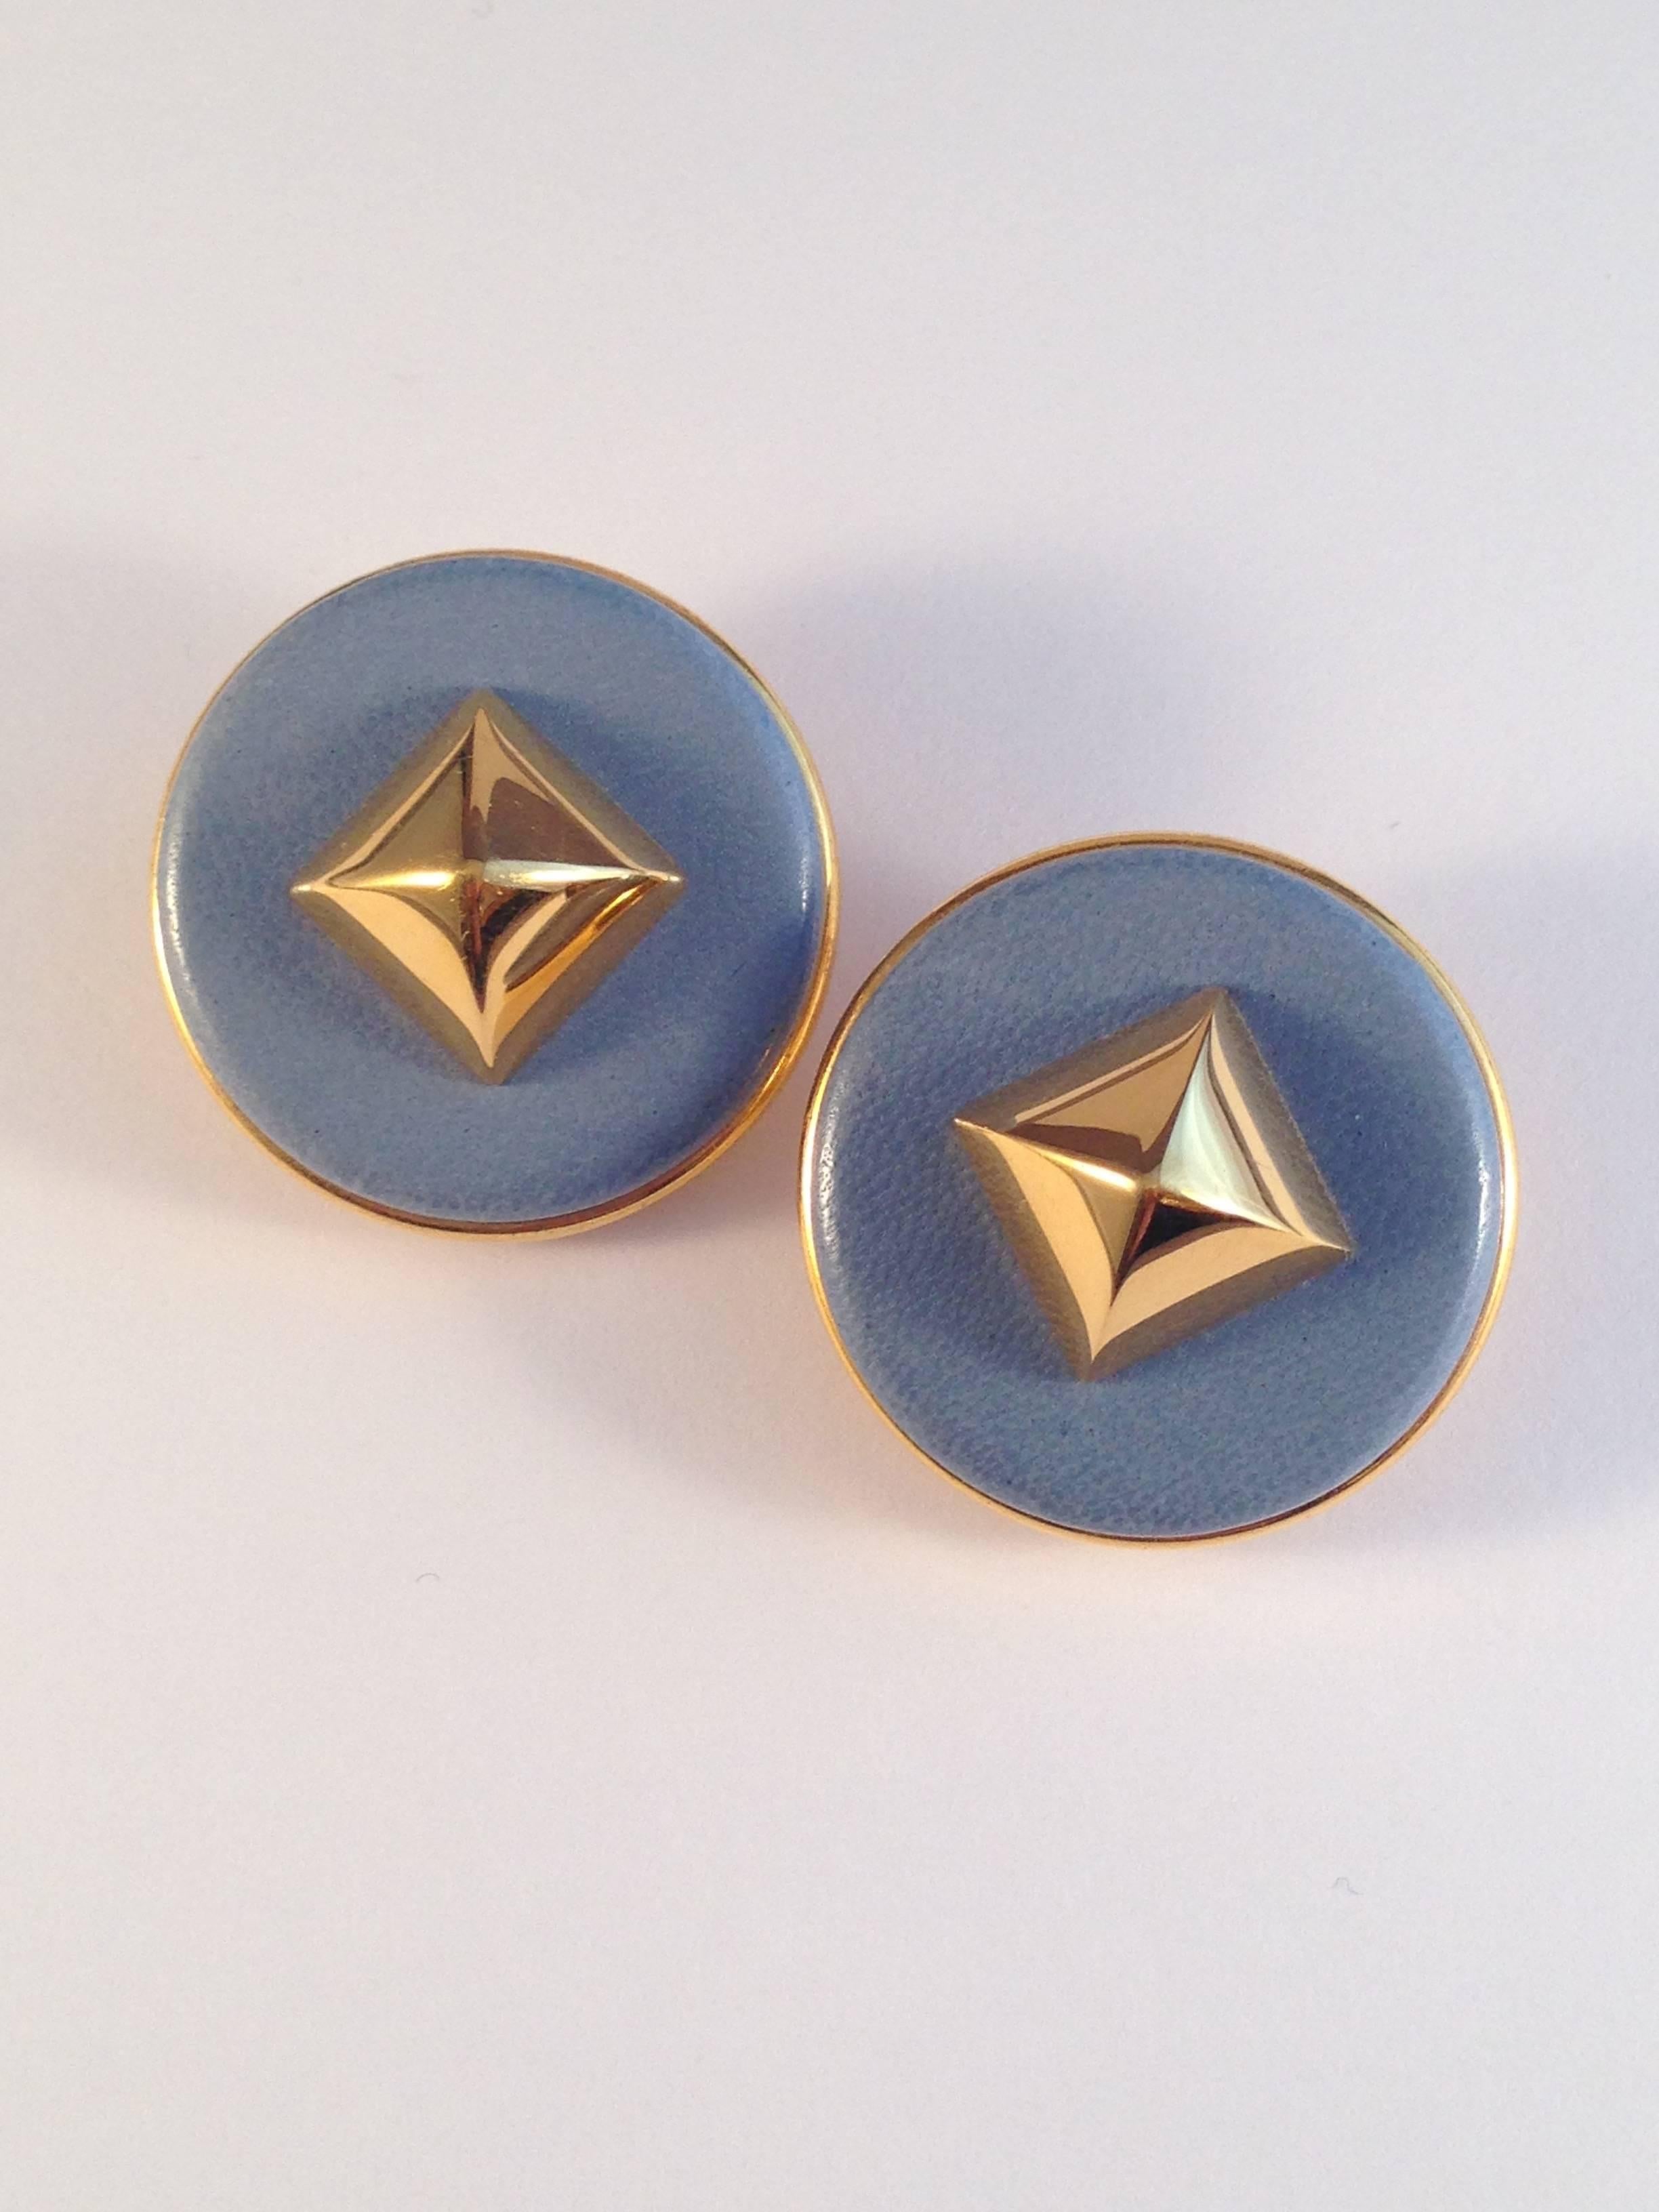 Vintage Hermes blue leather medor clip-on earrings. They measure 1 3/8" in diameter and are marked 'Hermes Paris' on the back. They are in excellent condition.